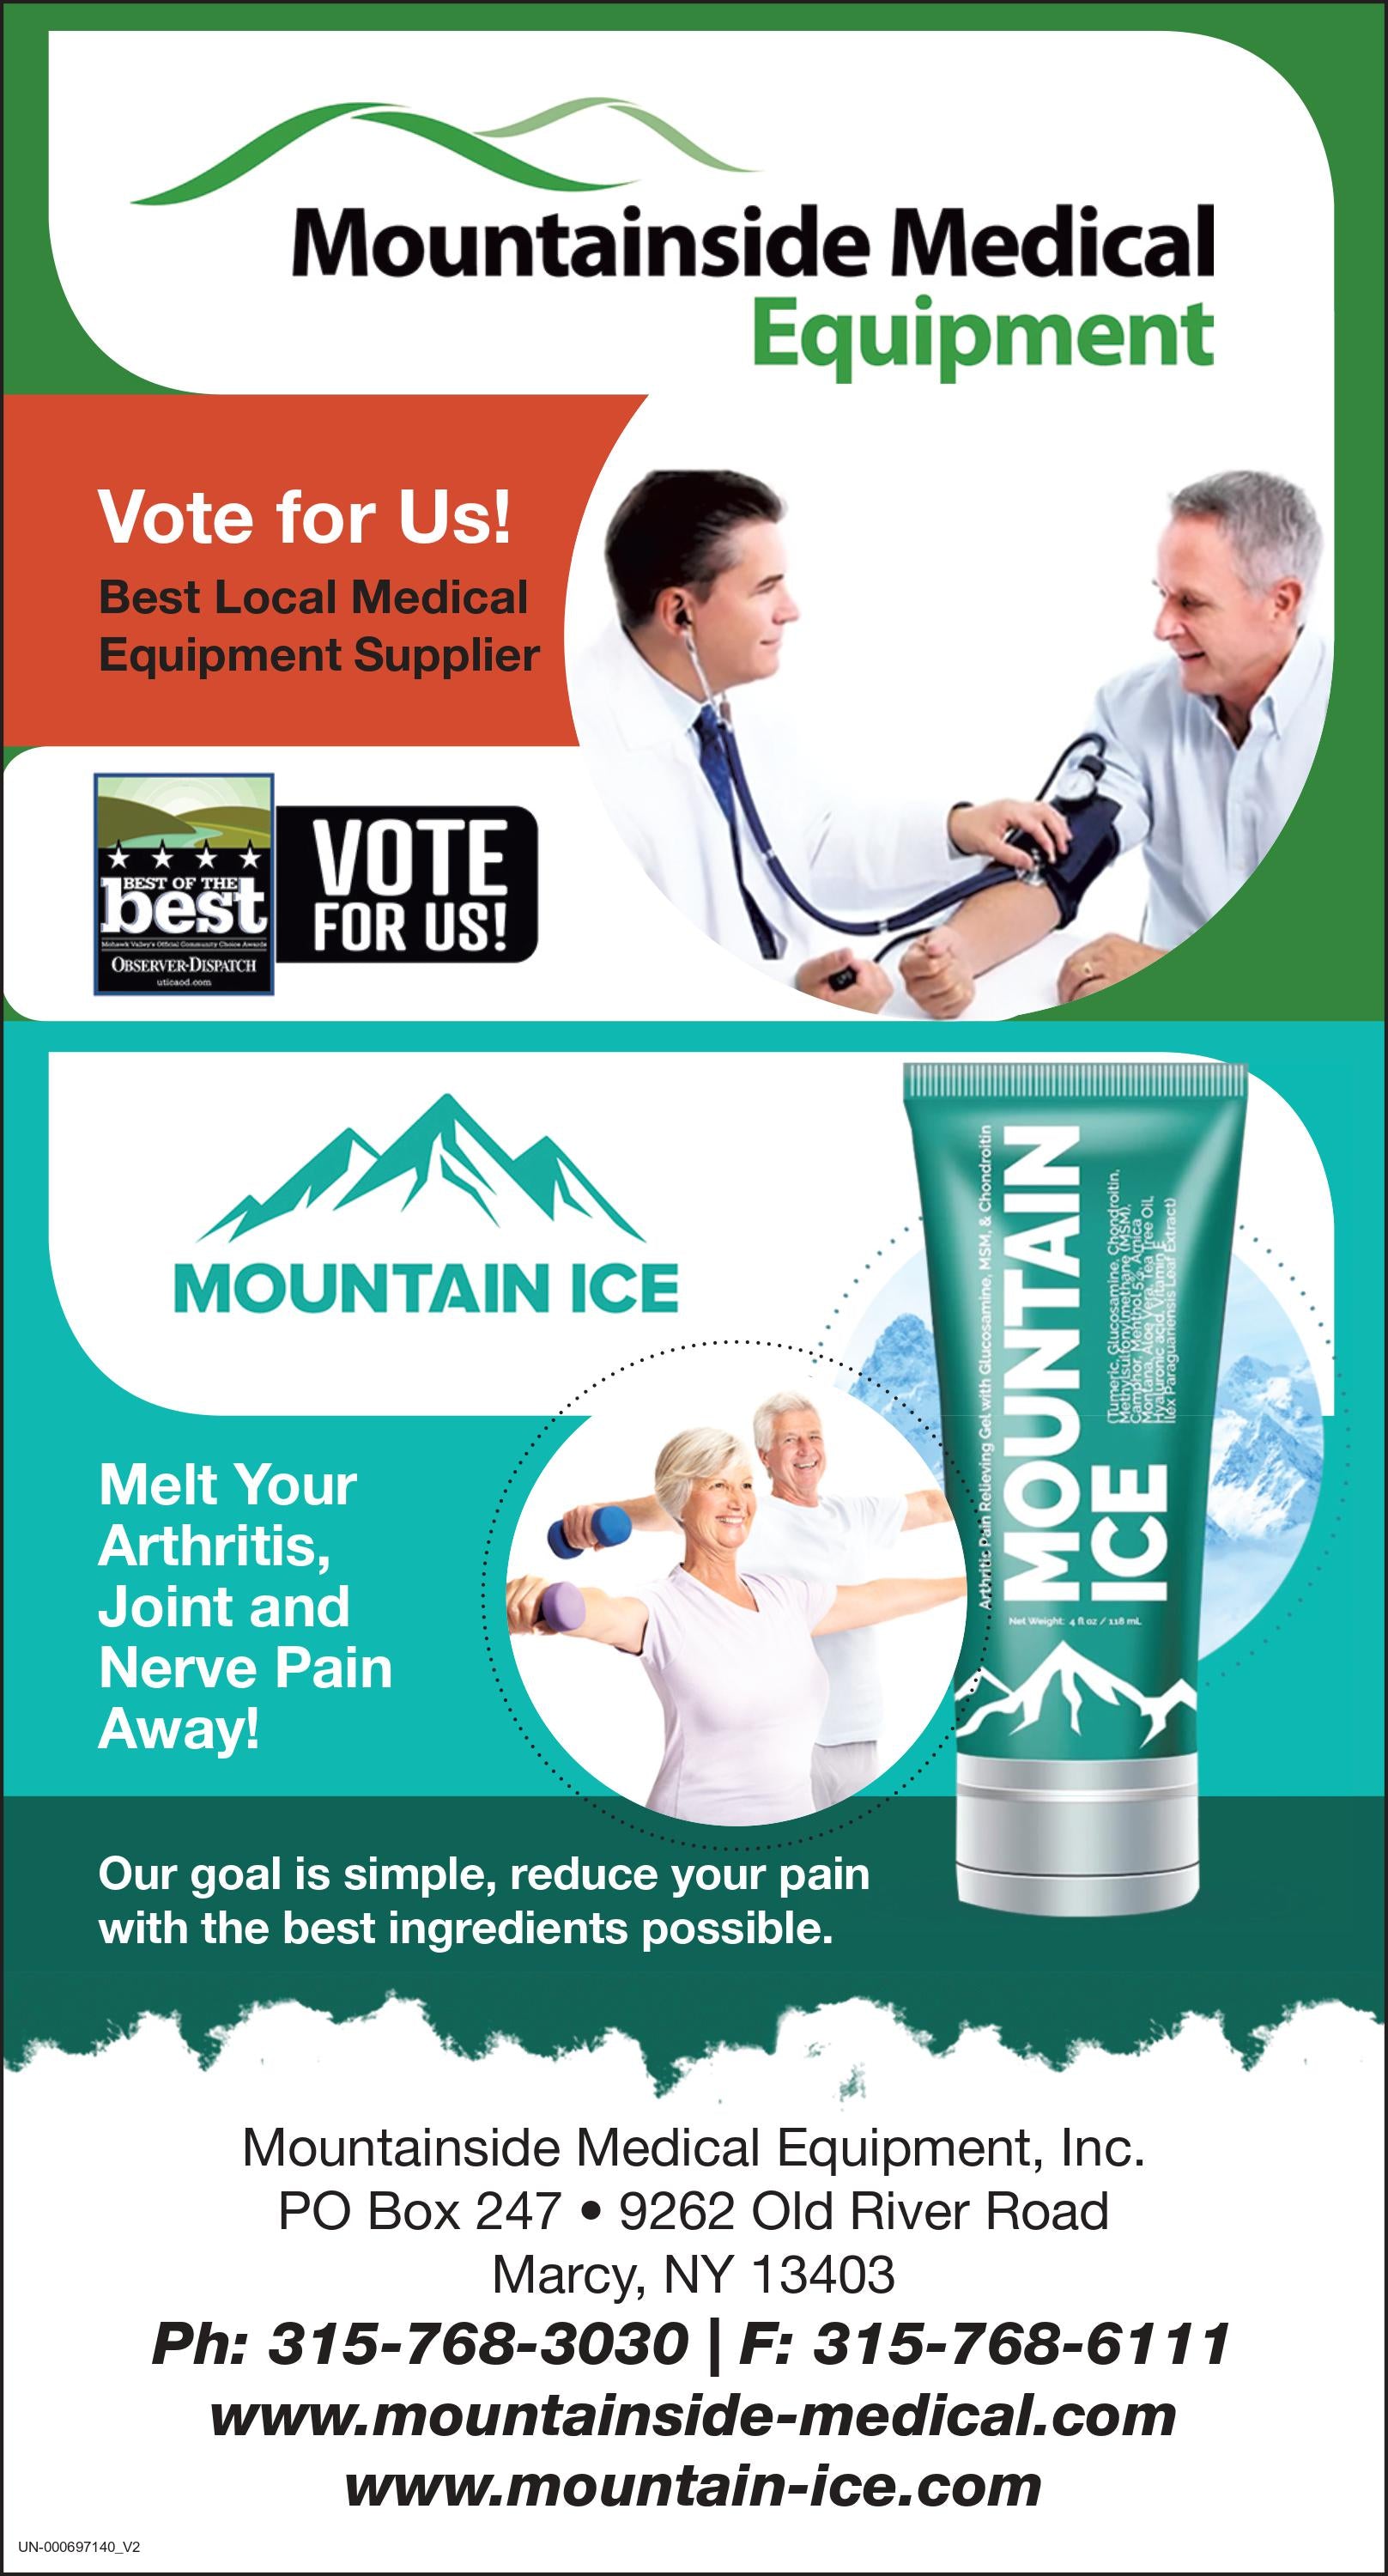 Mountainside Medical Equipment Nominated for 2022 Best of the Best Award